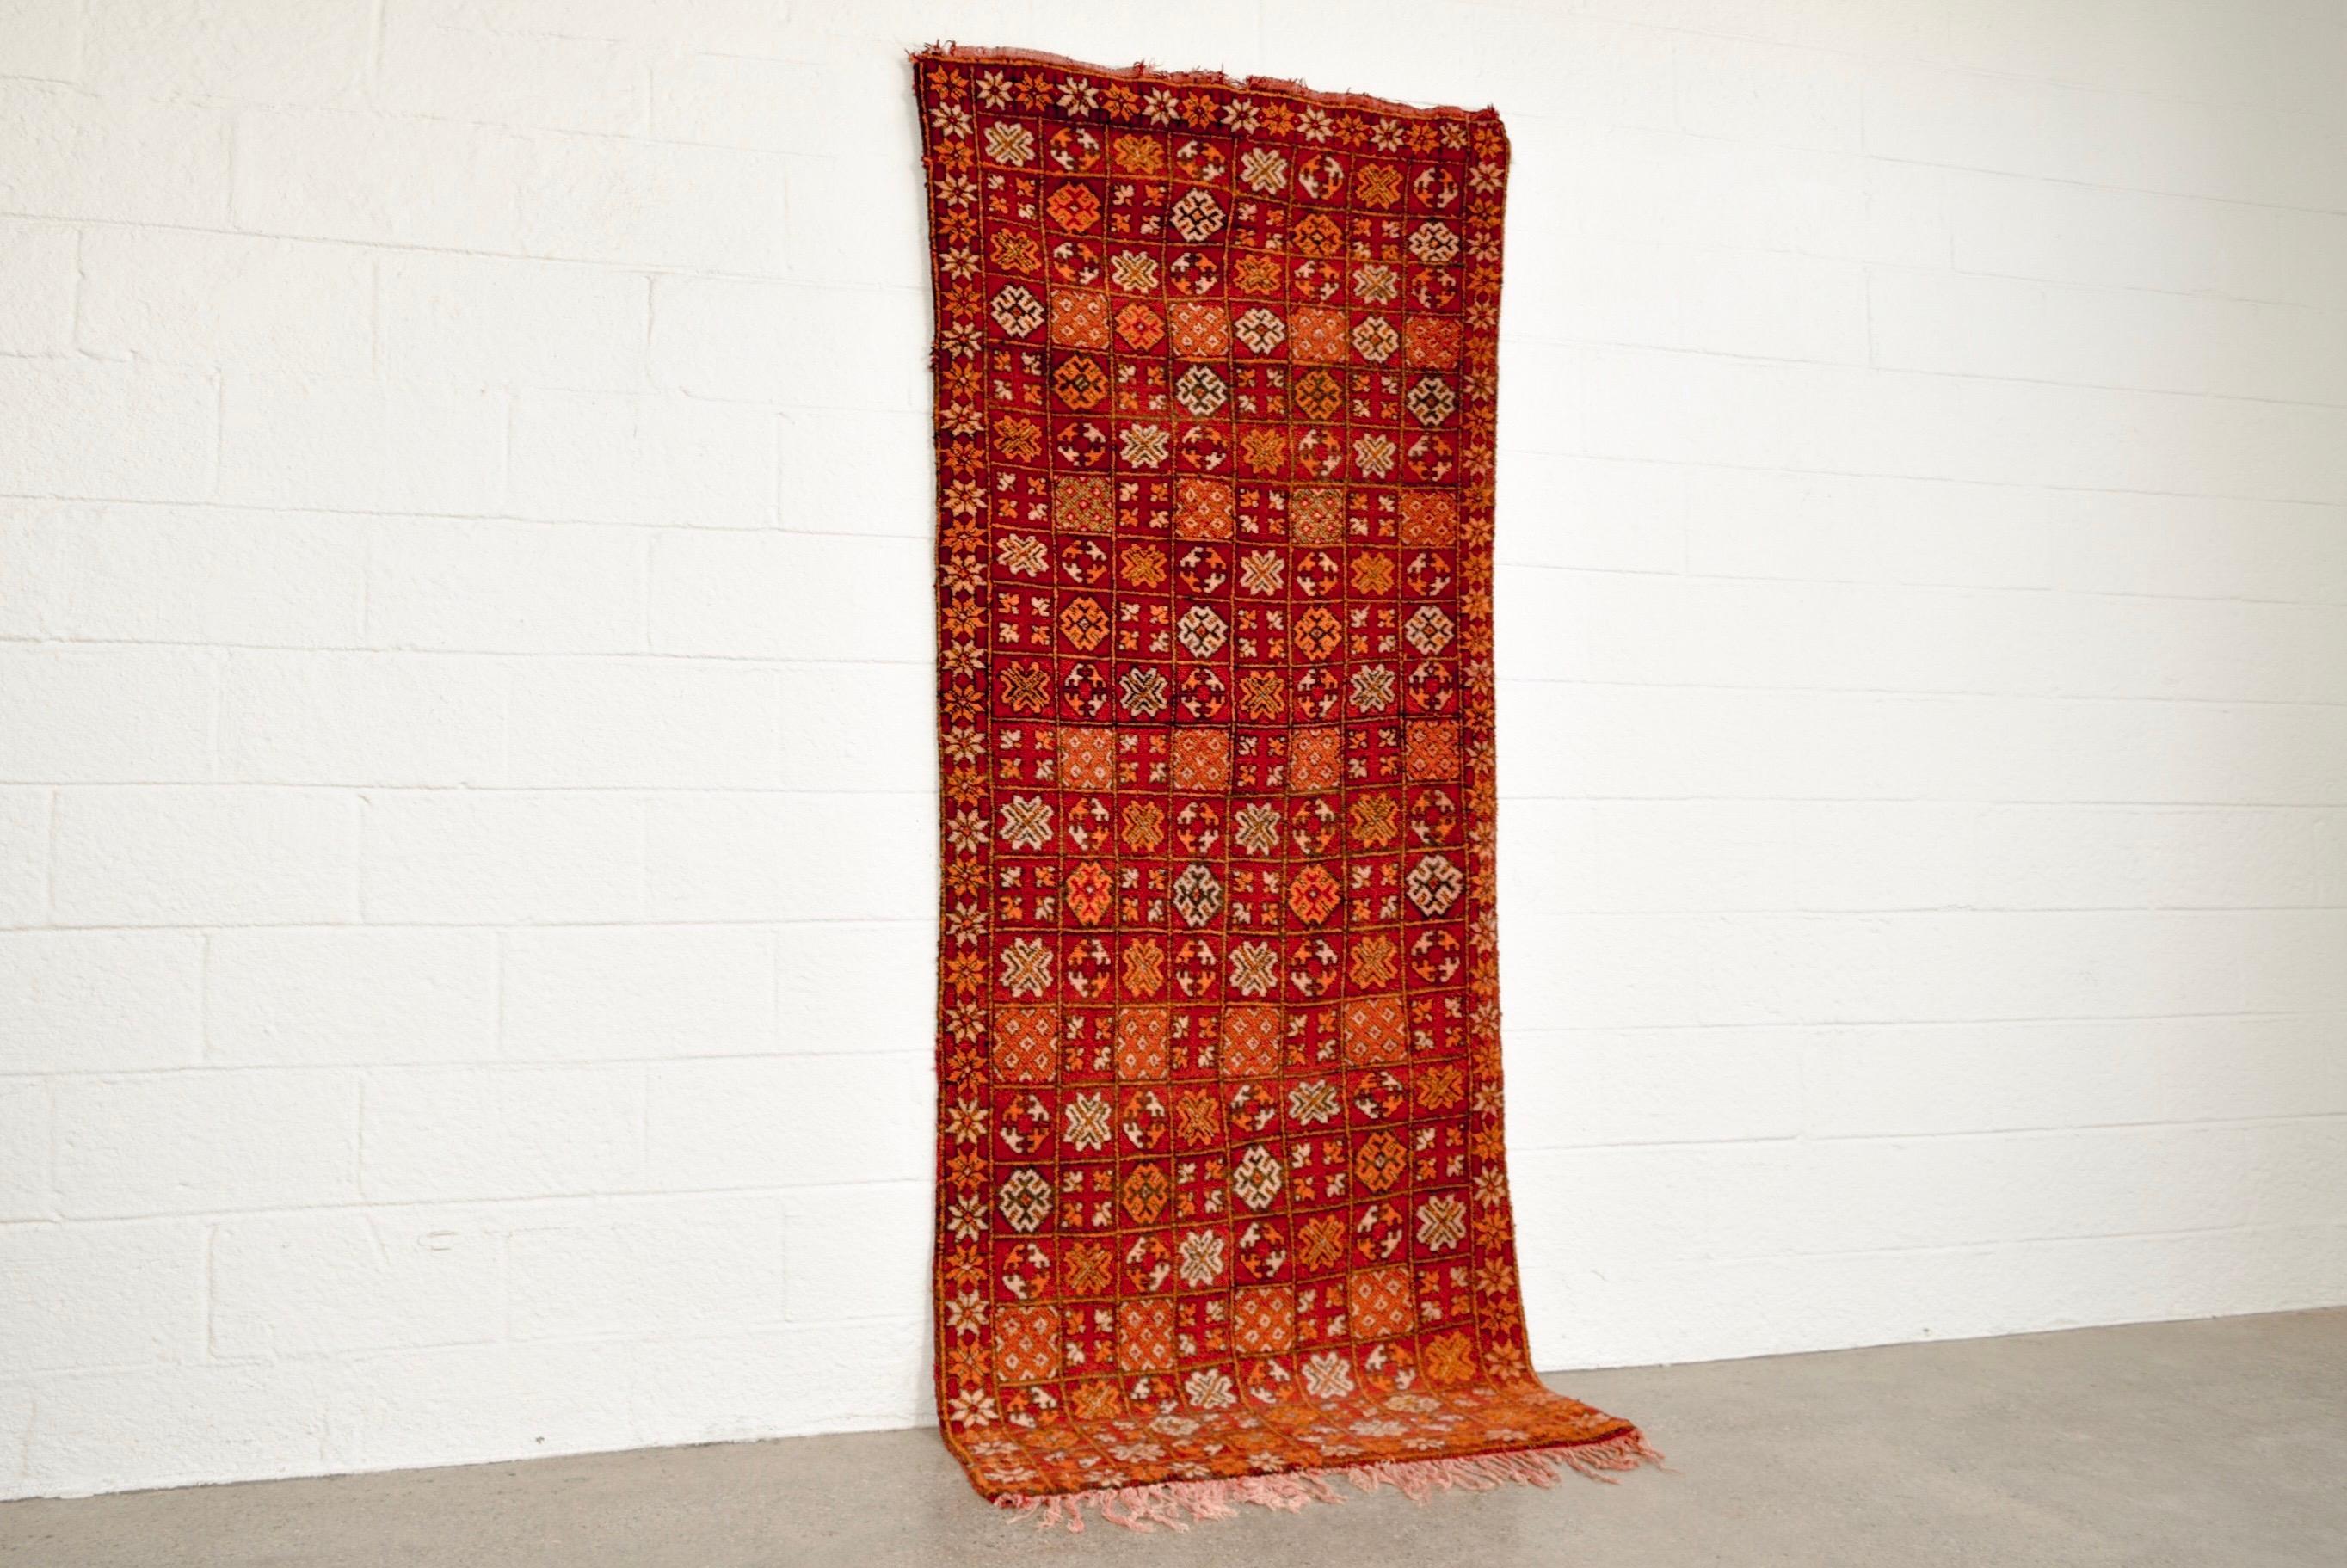 This rich and vibrant vintage handwoven Moroccan Boujad rug runner features an overall geometric pattern composed of a grid of intricate lozenges with smaller squares, pointed stars, crosses and other Berber symbolism. With a soft, low pile texture,